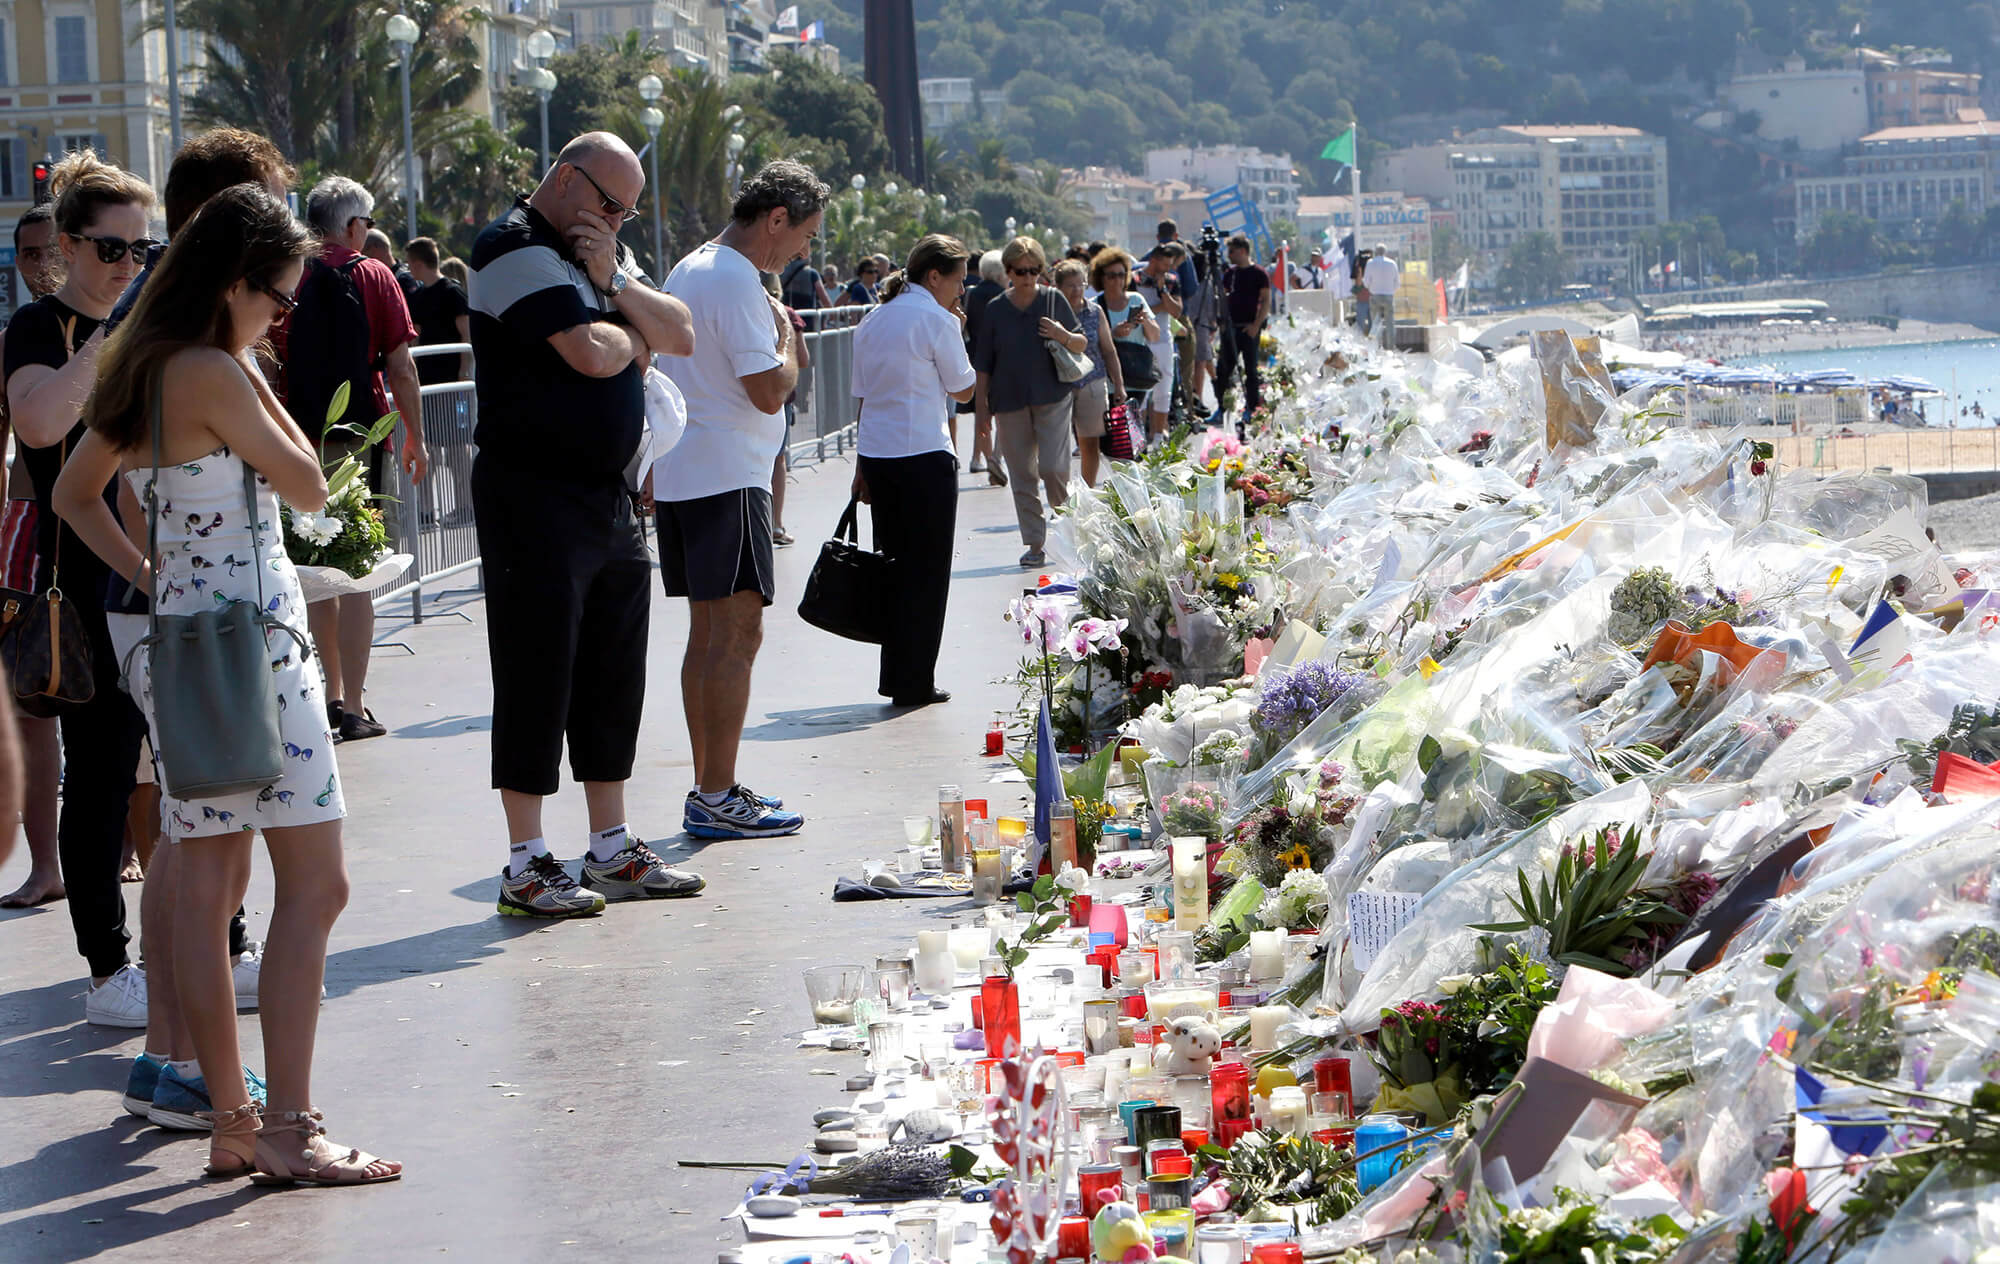 Image of a memorial set up for the vicitims of the Nice attack